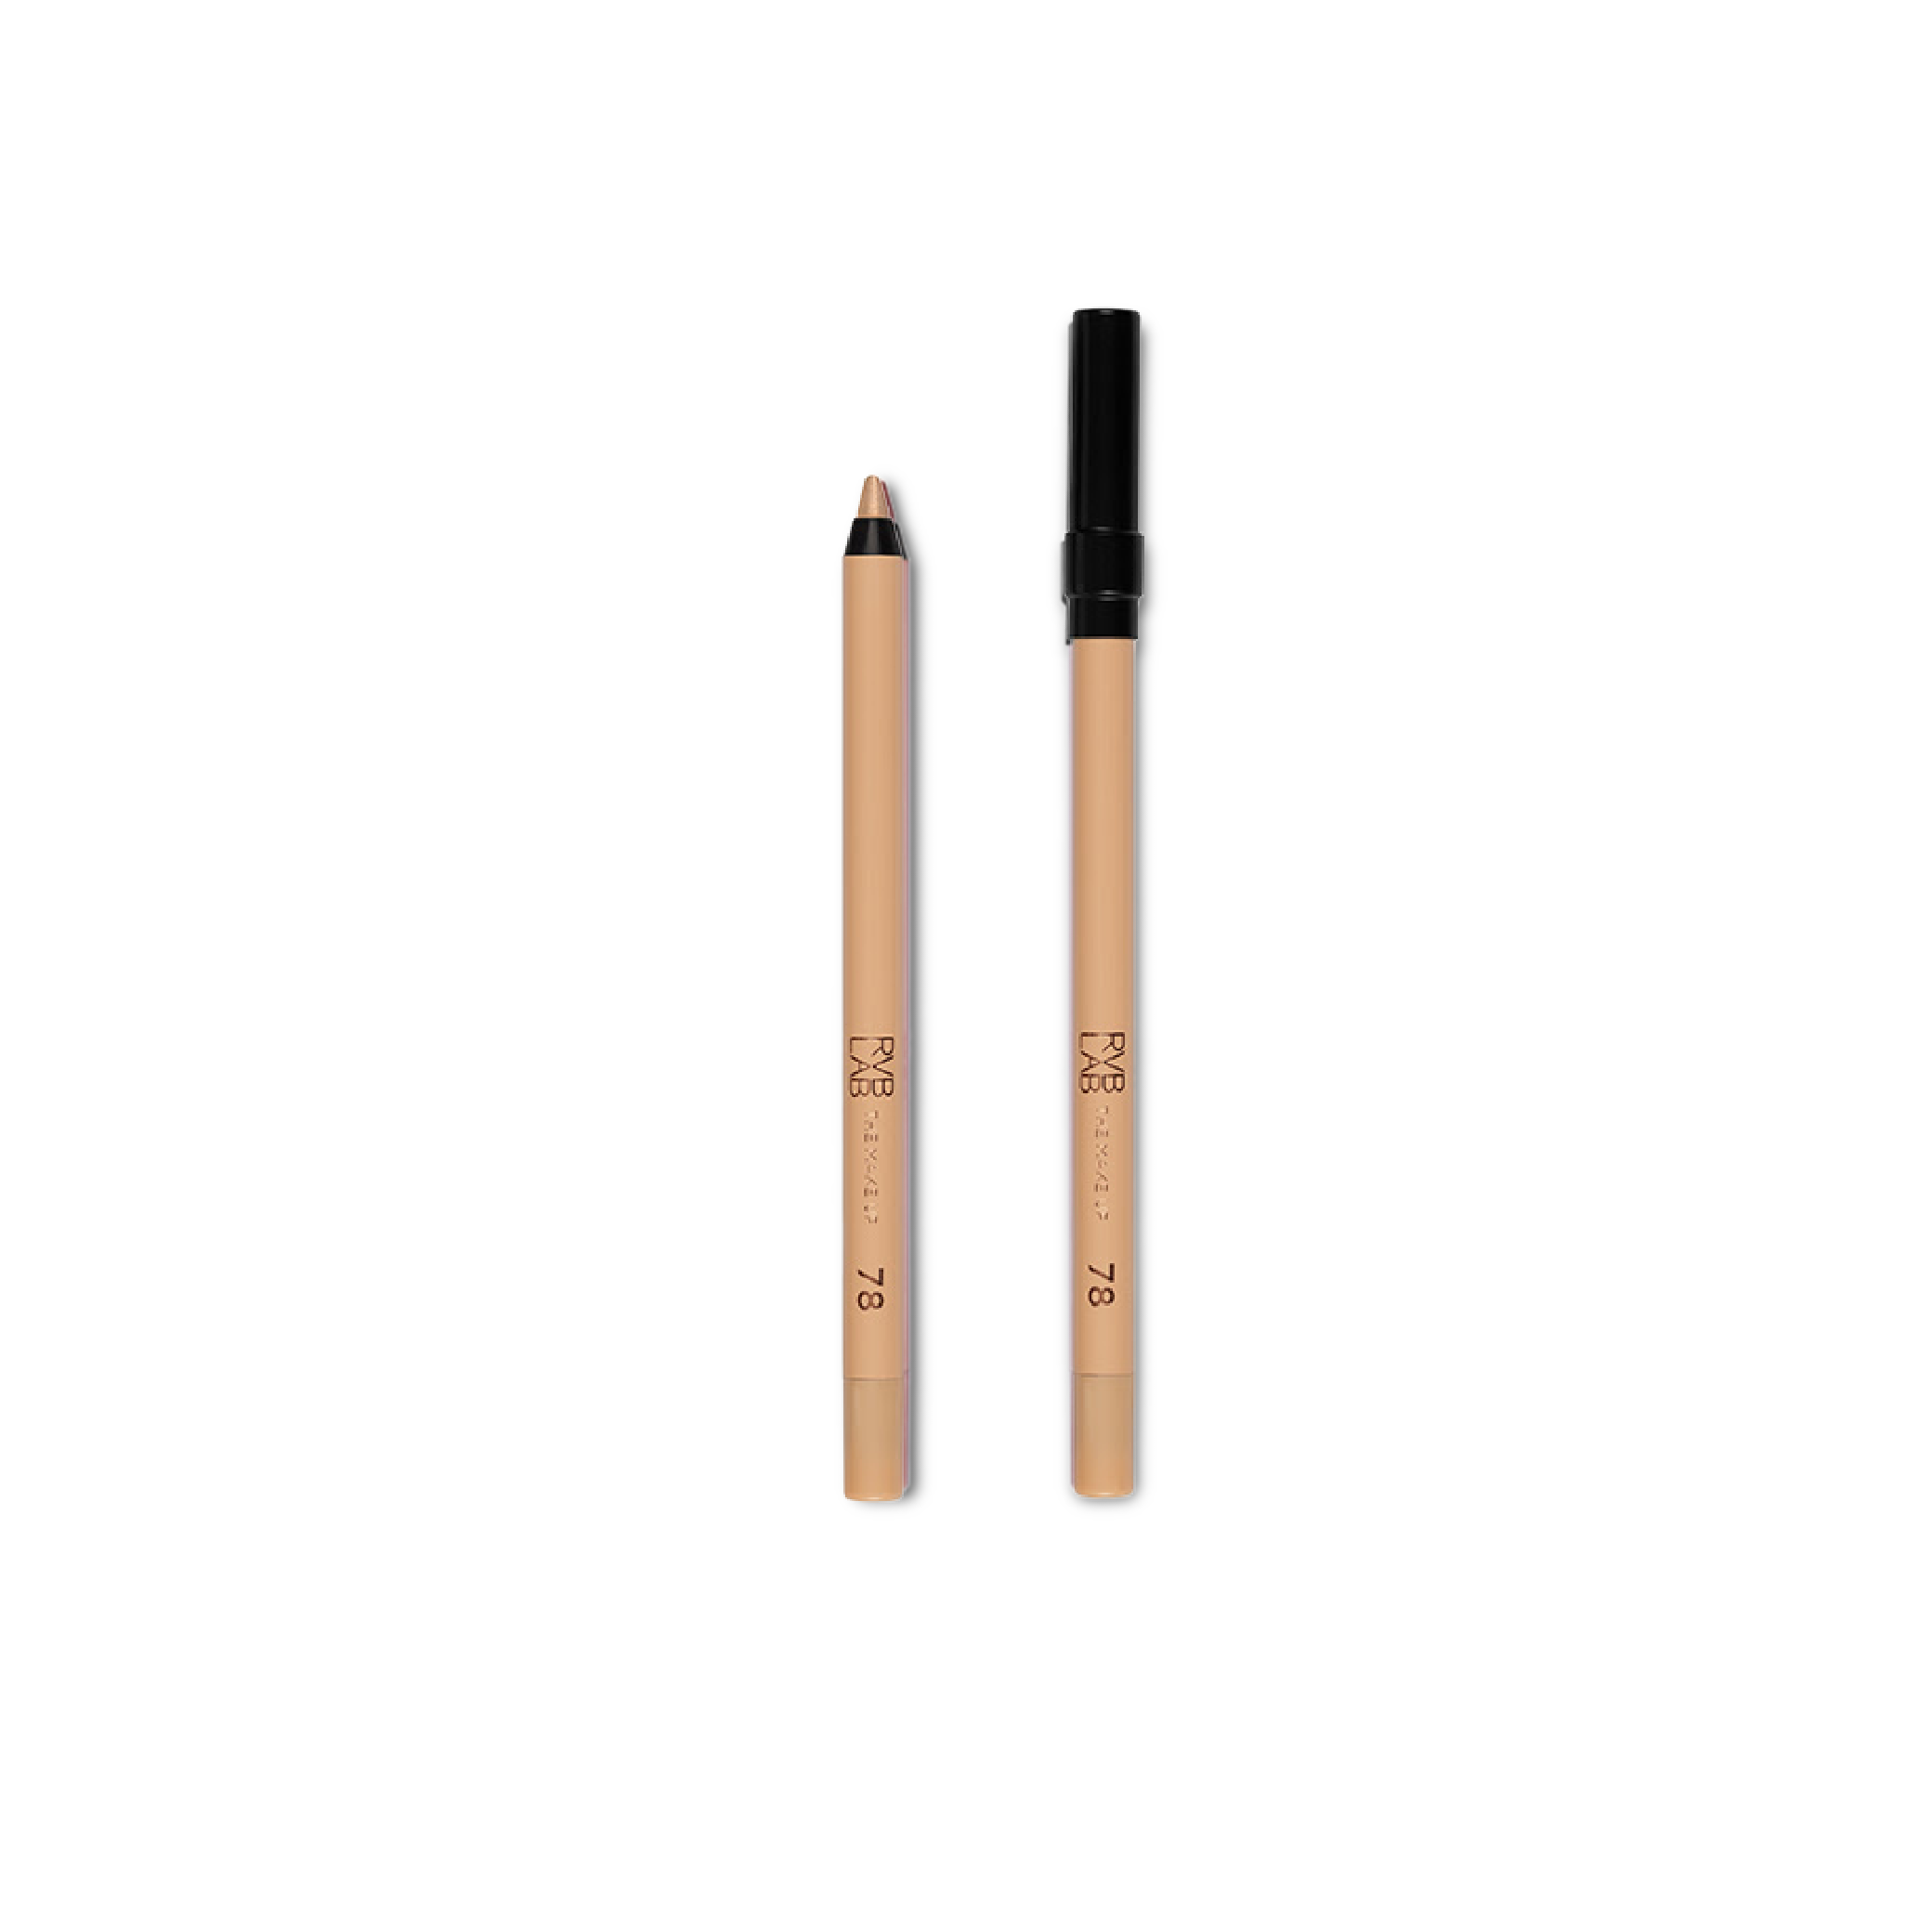 RVB Lab the Makeup White Hot Butter e Looking Hot Kajal Eye Pencils, Pink Avenue Skin Care, Toronto, Canadá